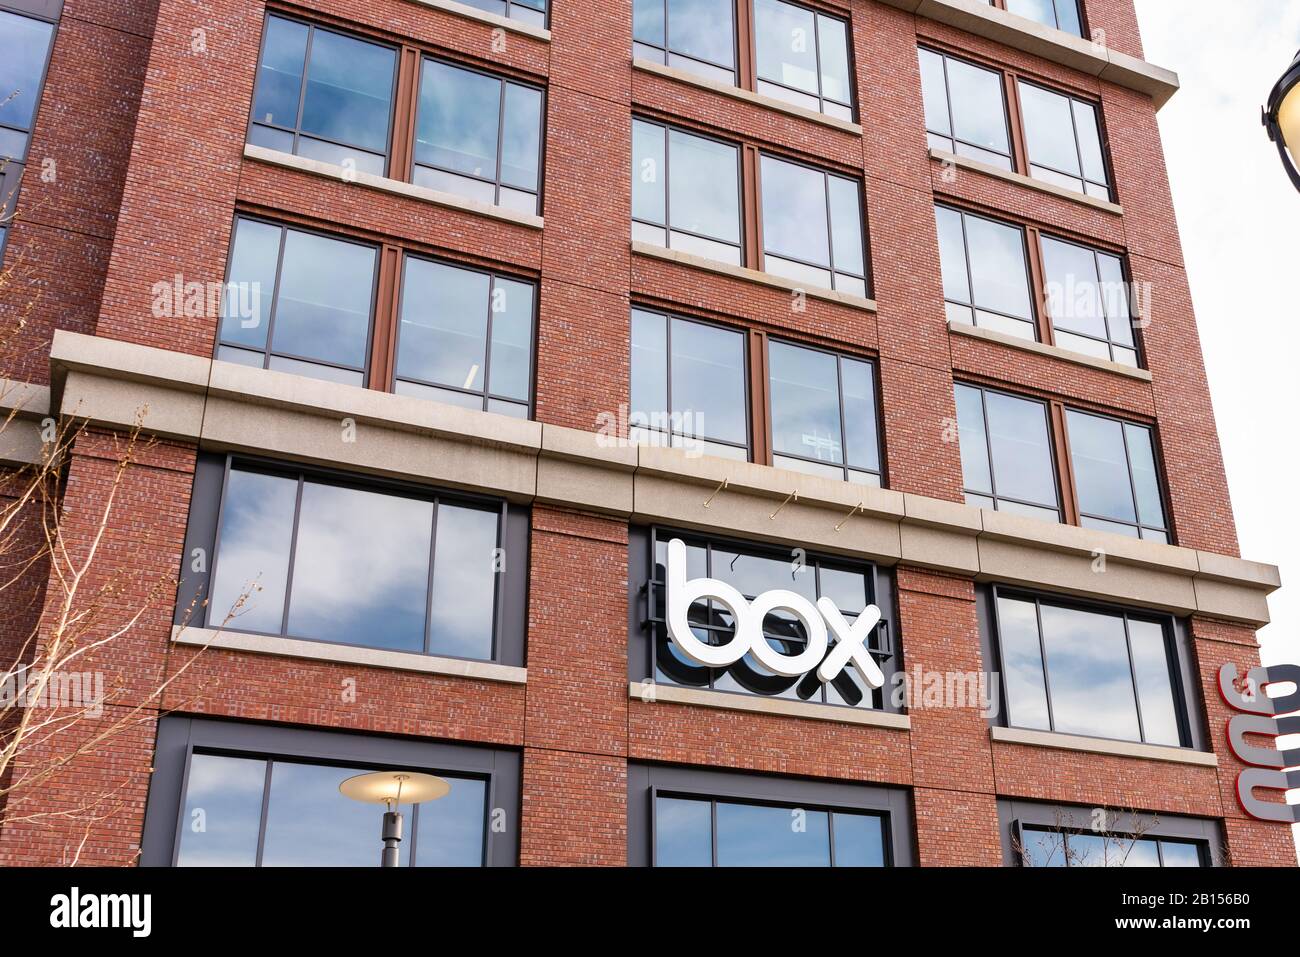 Feb 21, 2020 Redwood City / CA / USA - Box, Inc headquarters in Silicon  Valley; Box, Inc. (formerly Box.net) is a cloud content management and file  sh Stock Photo - Alamy